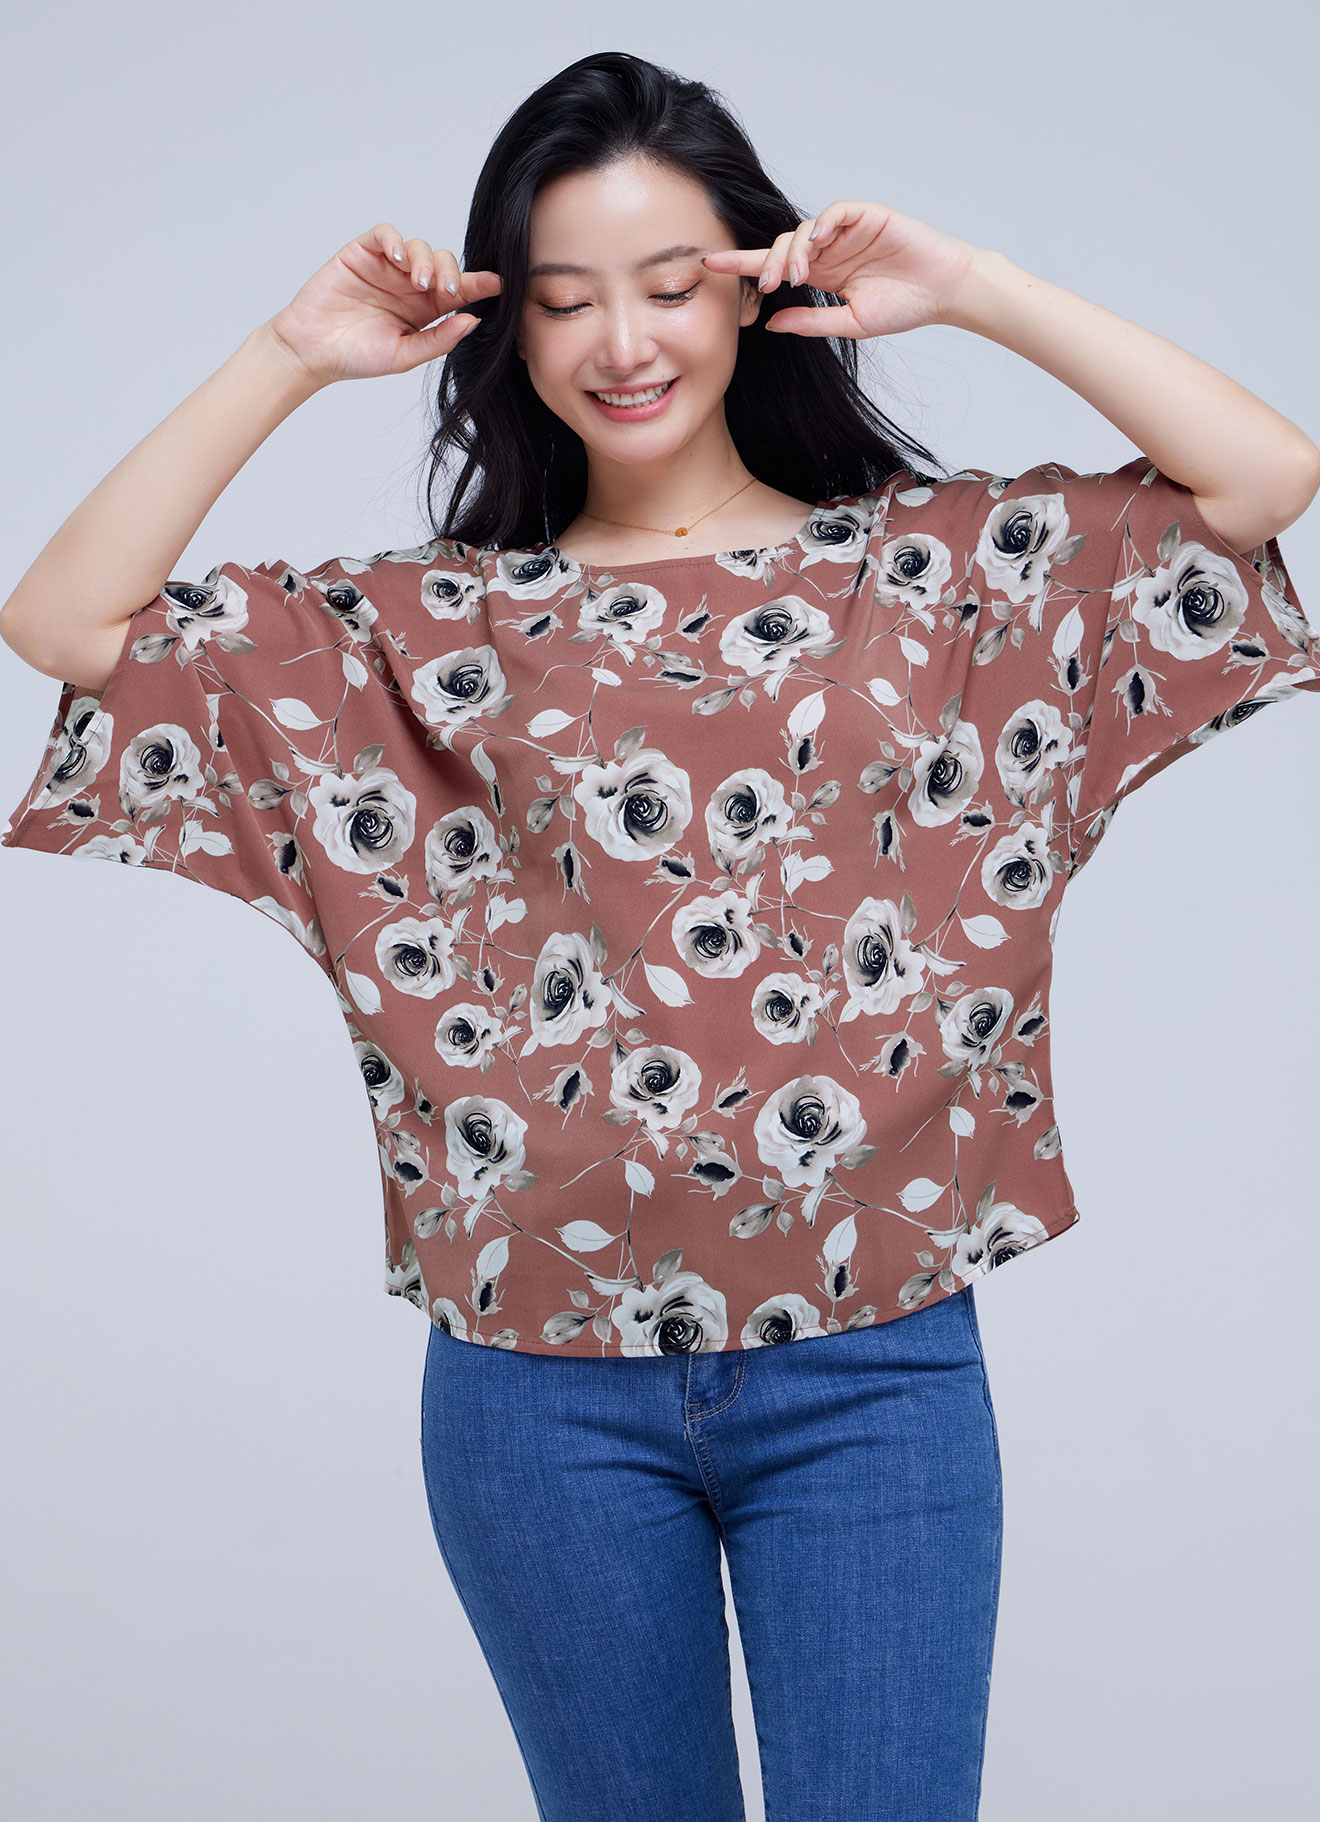 Brick-Dust by Floral Printed Blouse